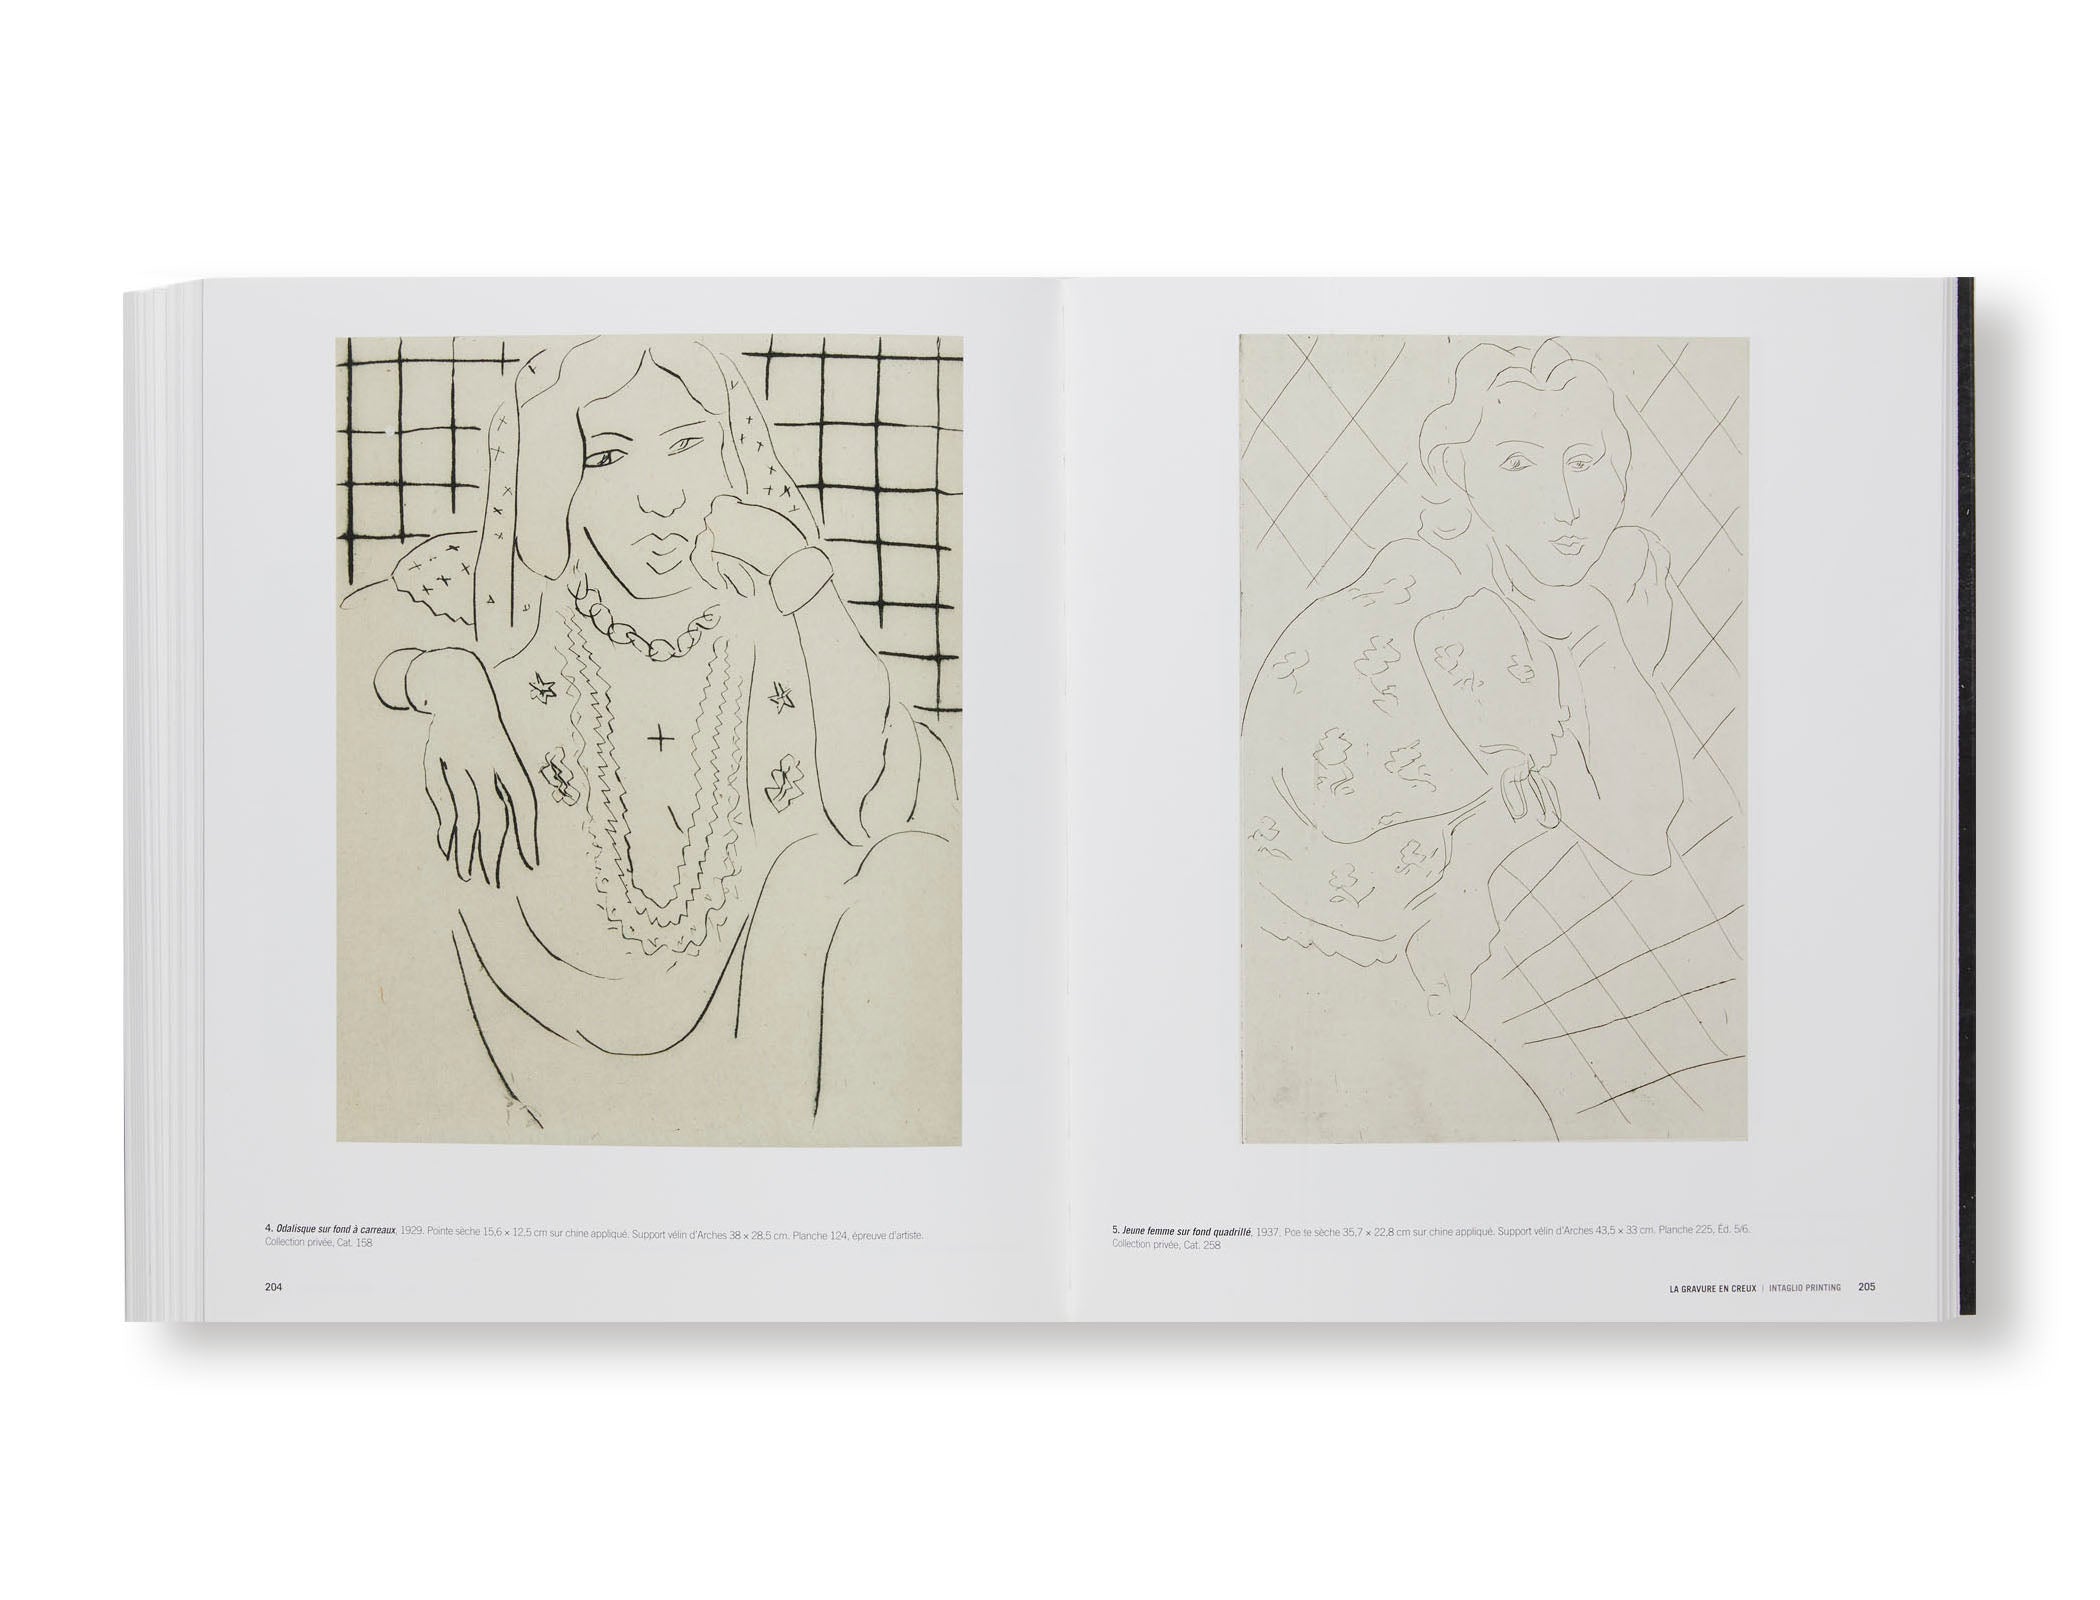 MATISSE AND ENGRAVING by Henri Matisse